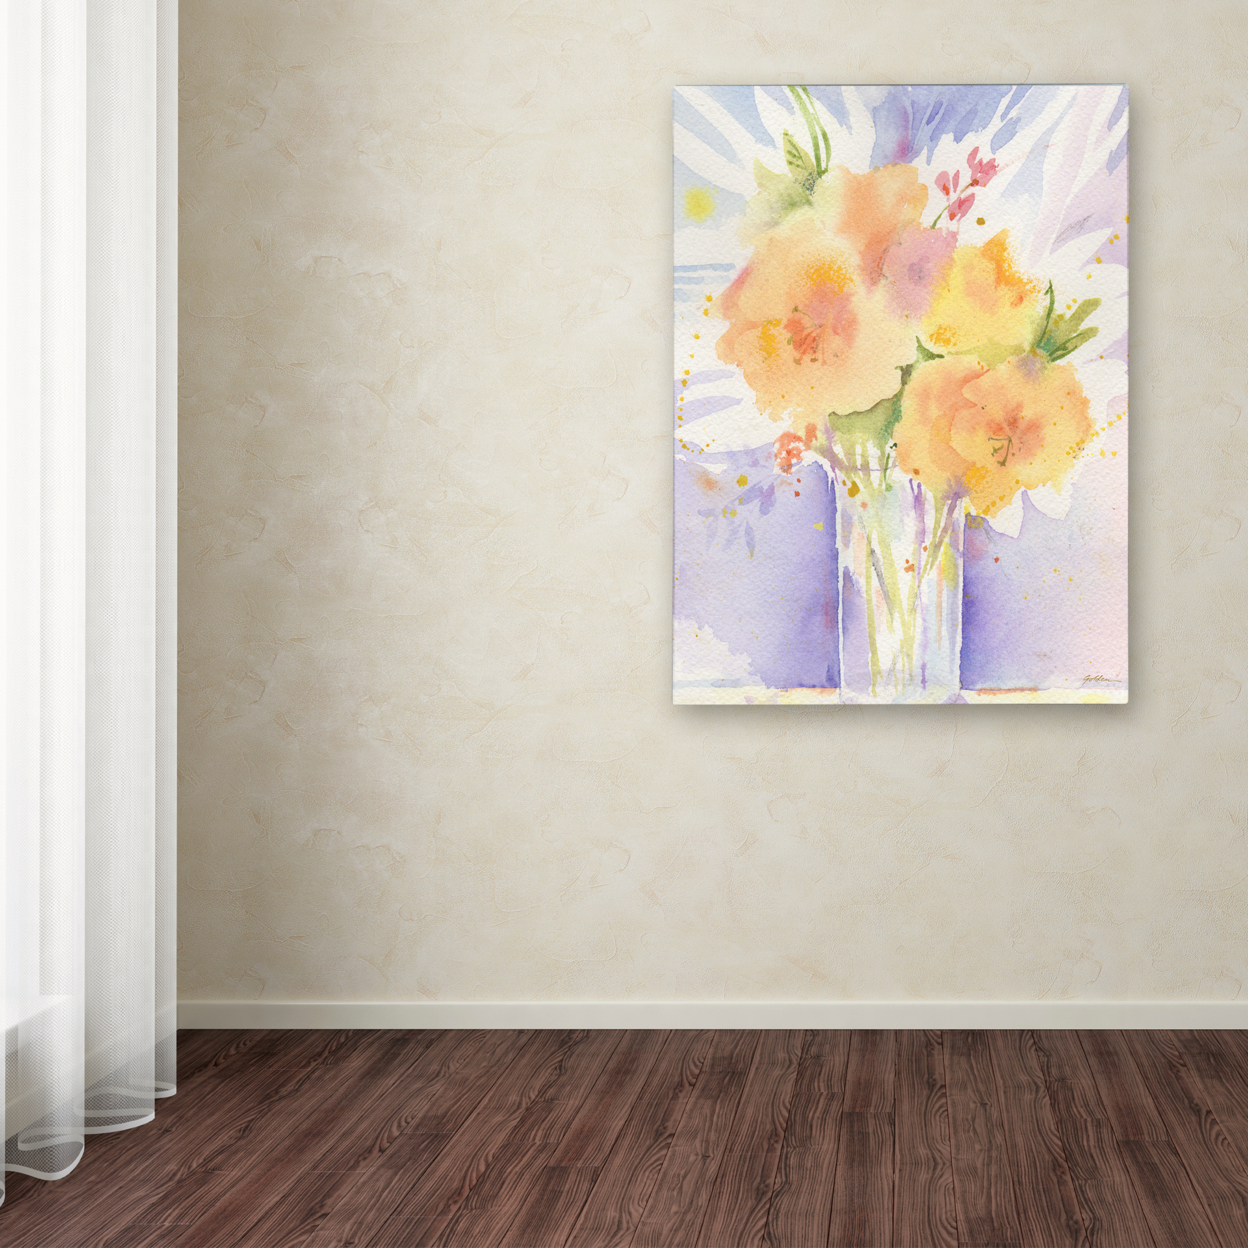 Sheila Golden 'Purple Vase Reflection' Canvas Wall Art 35 X 47 Inches